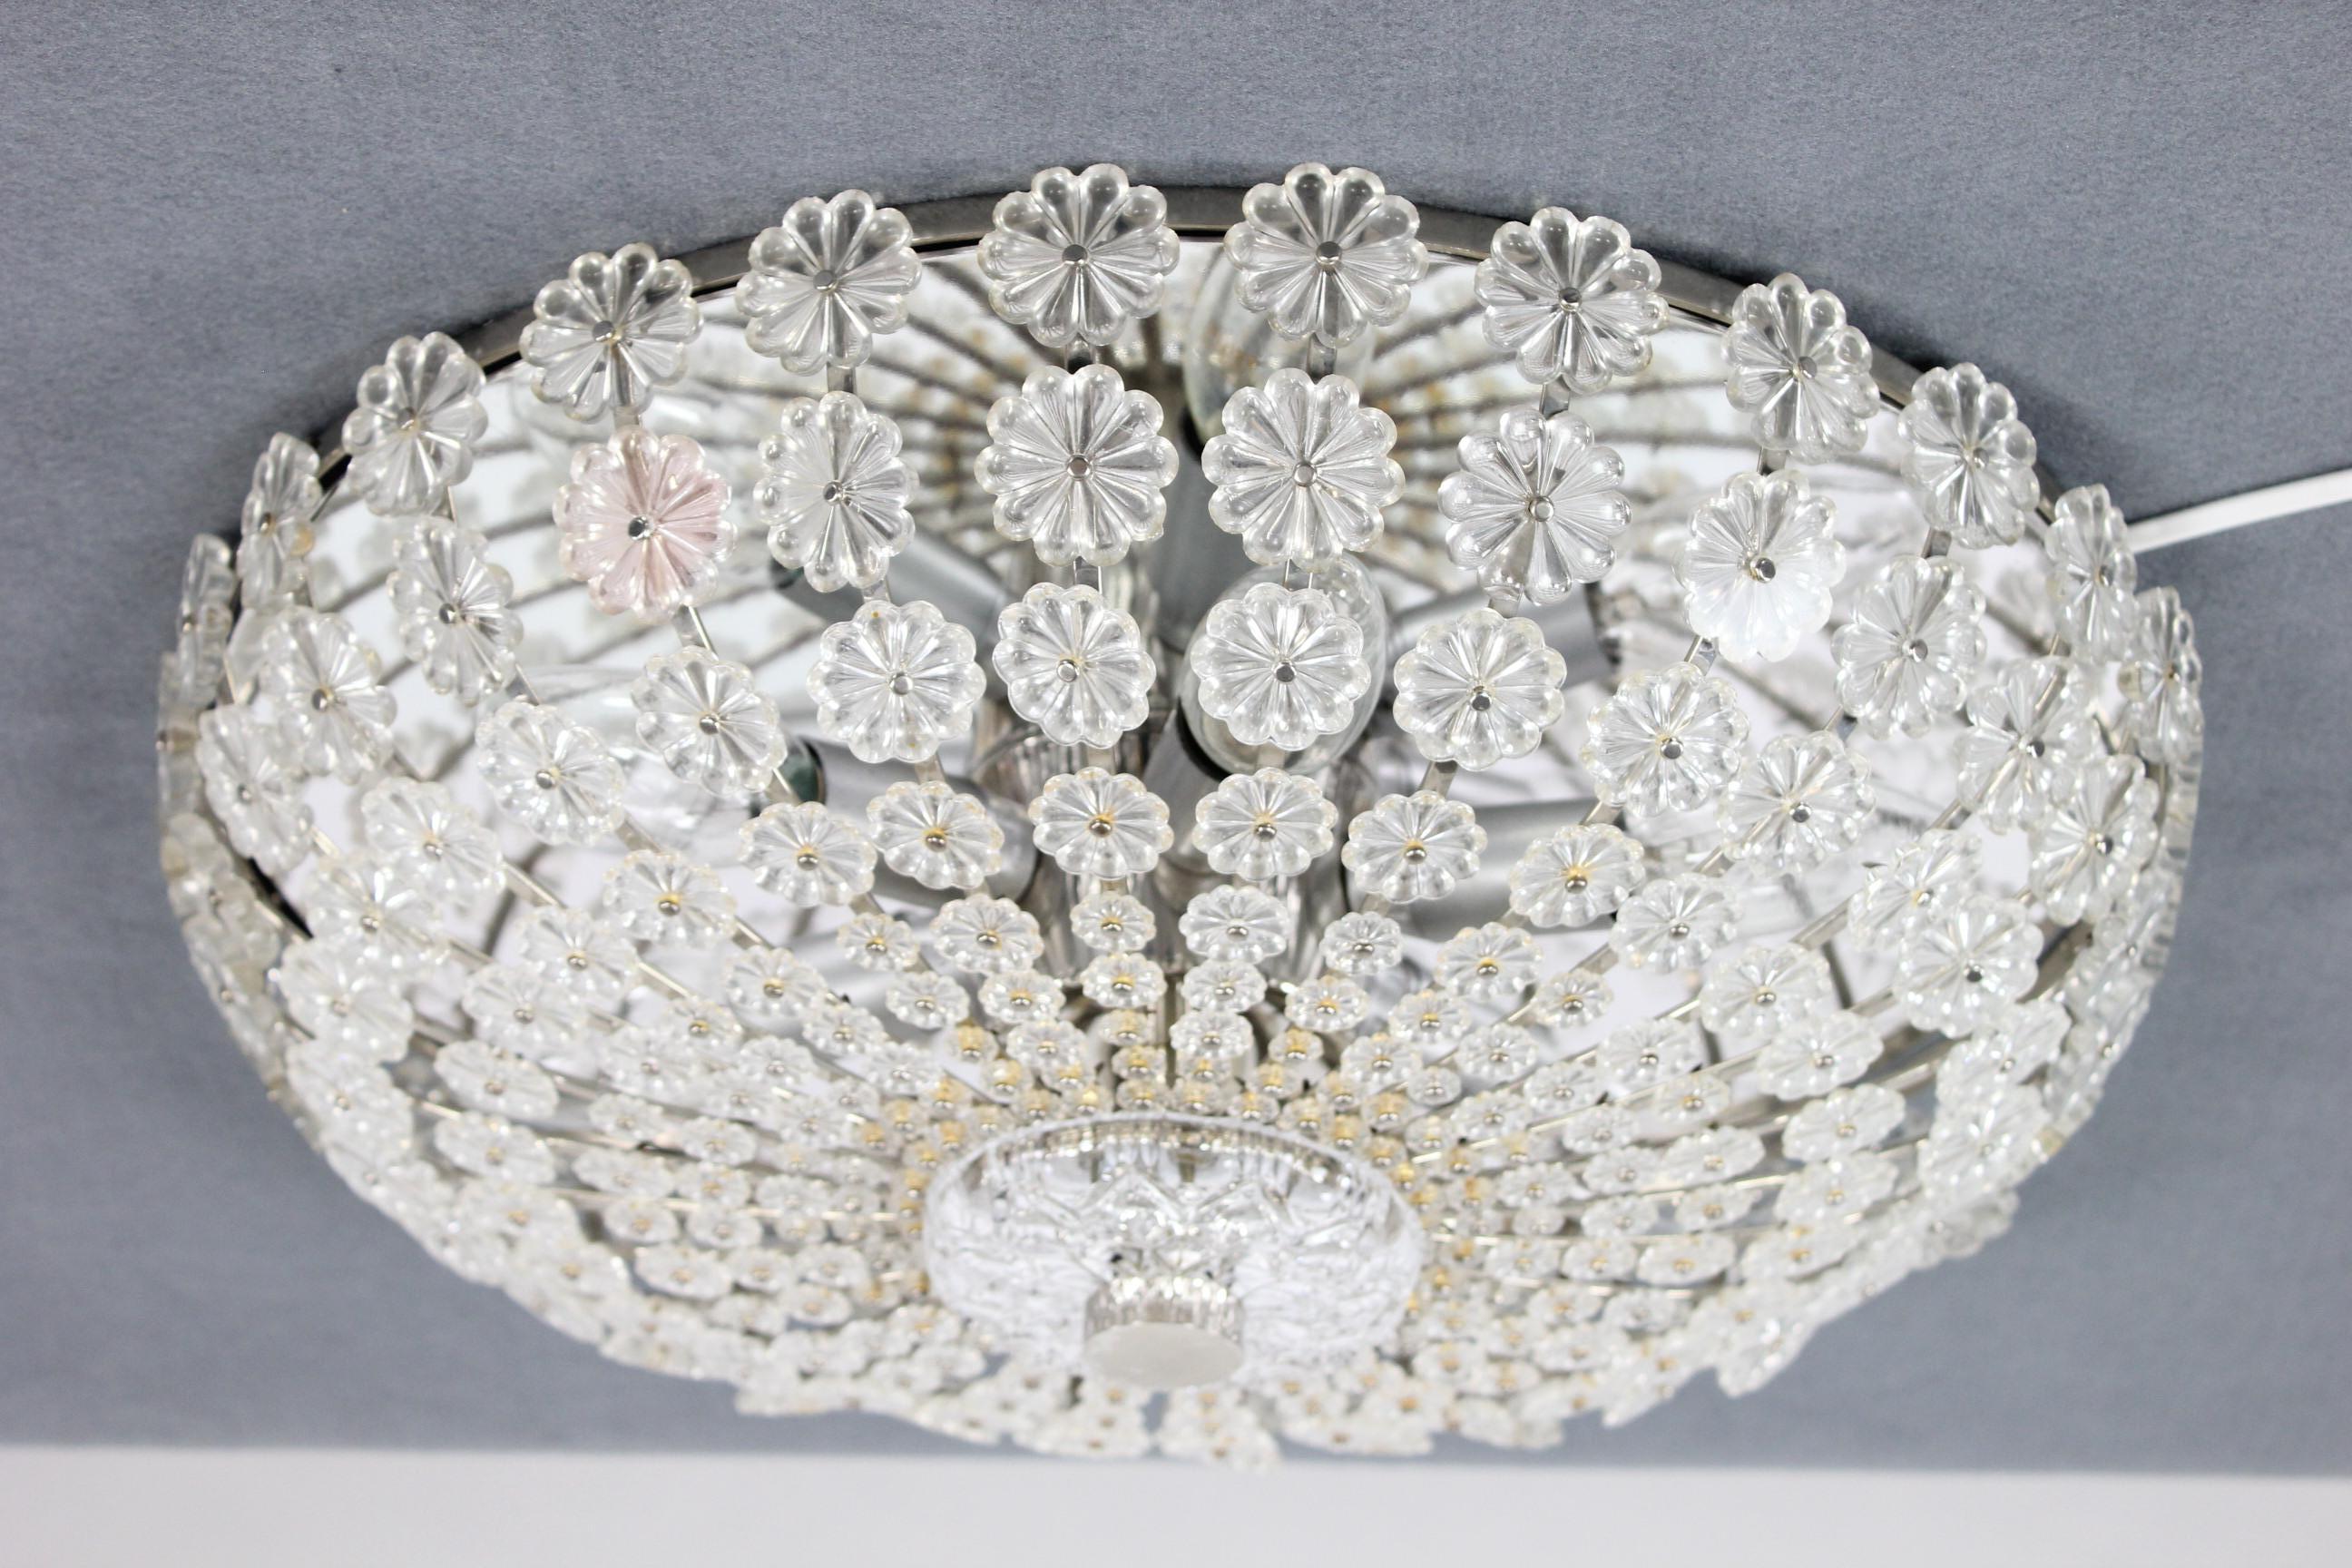 Ruppert Nikoll ceiling fixture glass blossom light
Design Emil Stejnar at the 1950s
in fine complete condition with 270 glass blossoms
only the chromed surface of the screw into the center is peeling of
diameter 16.5'' height 5'' weight 2.9